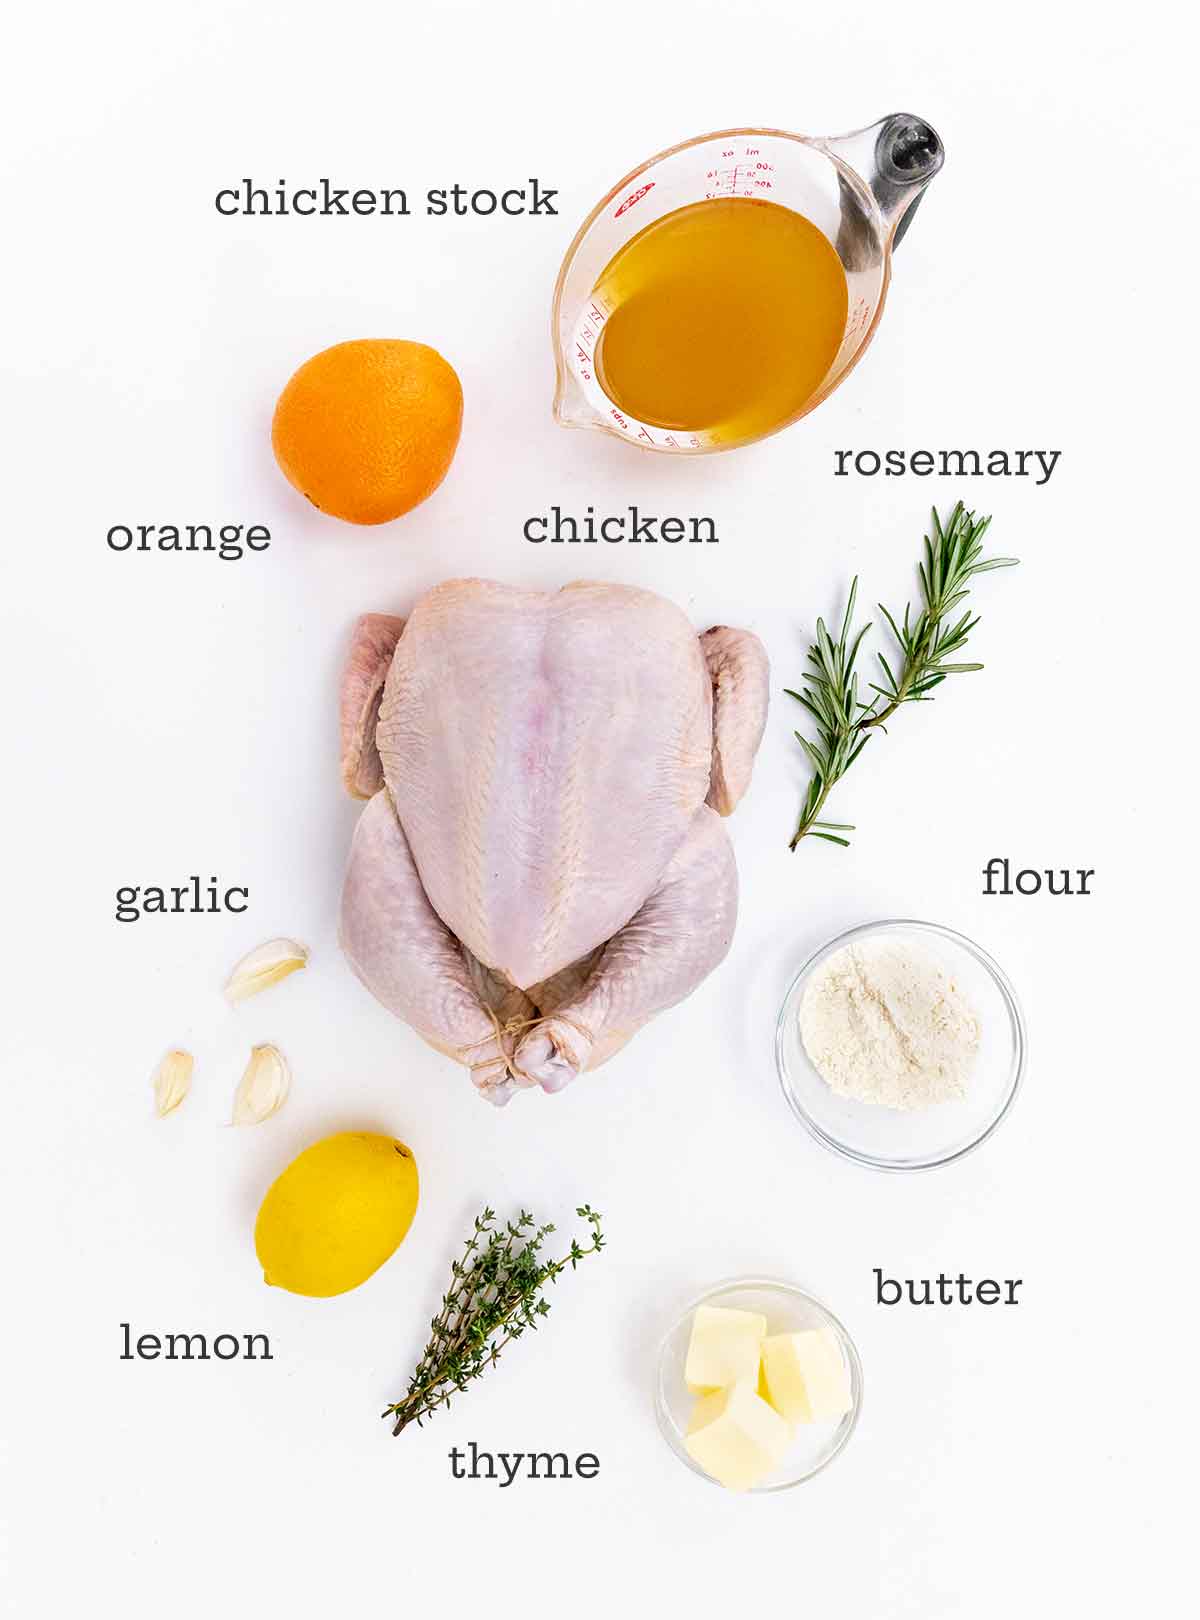 A chicken, orange, lemon, stock, and herbs on a white background.